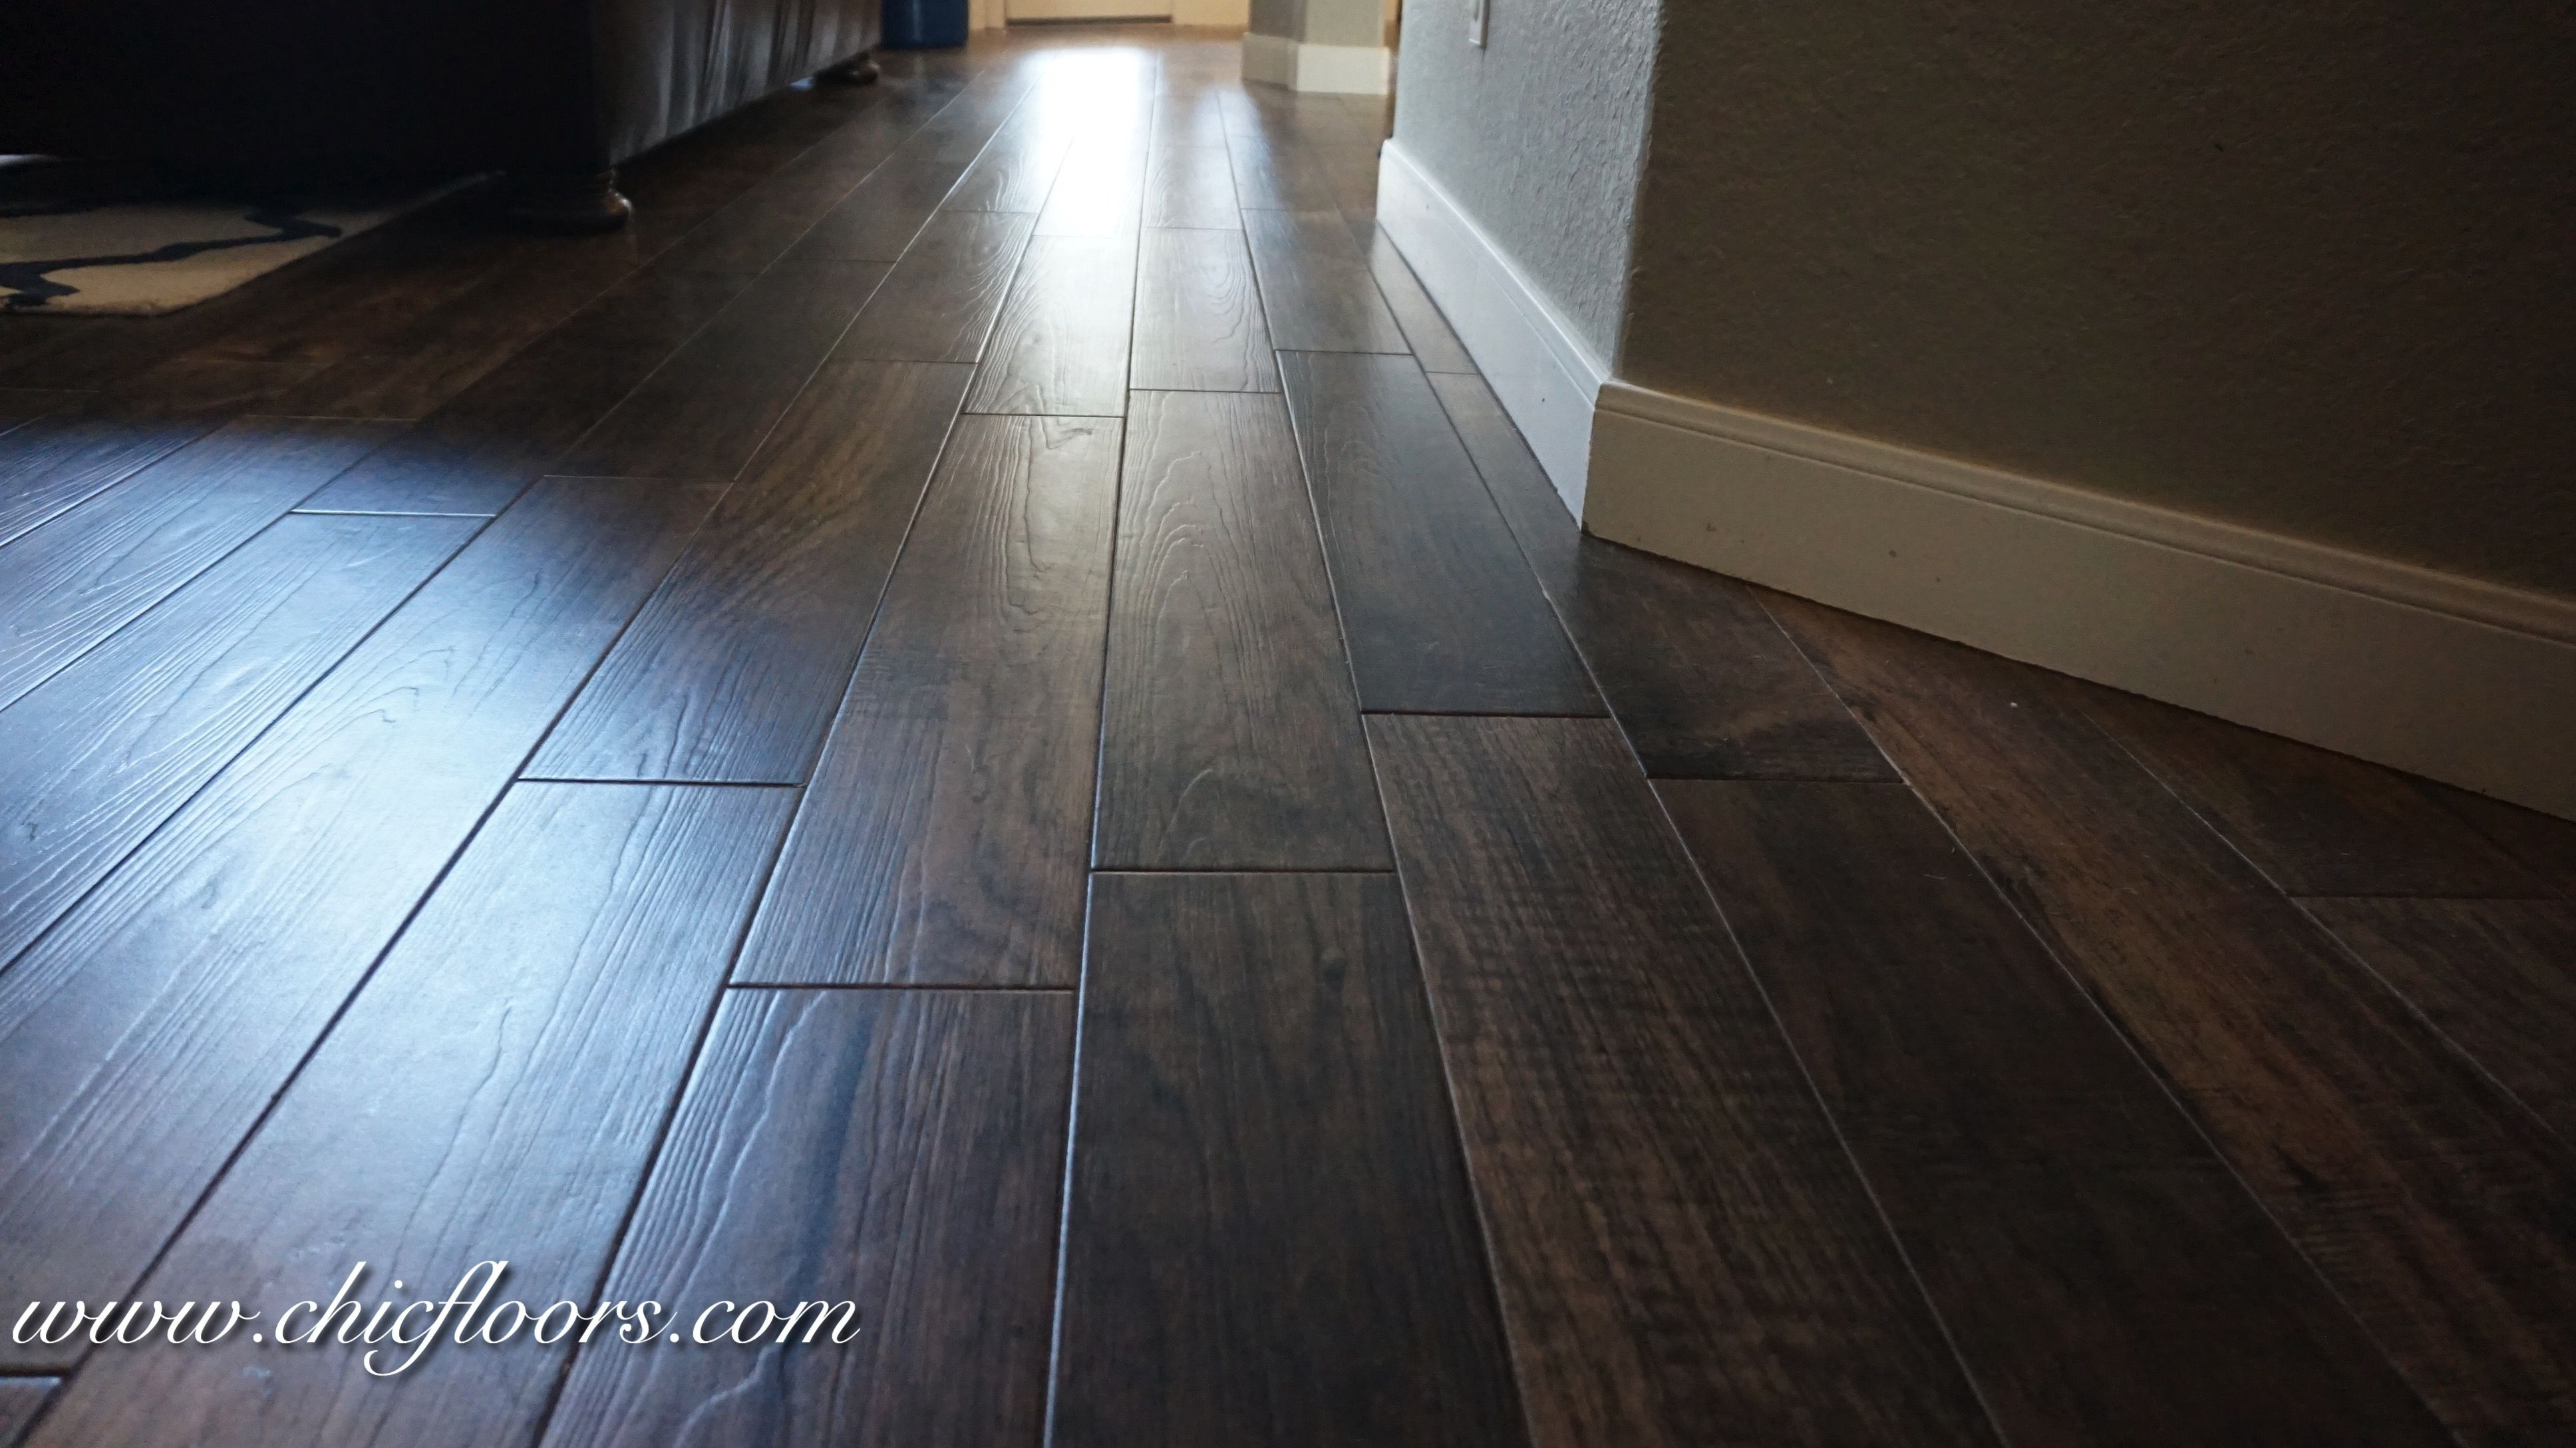 Maple Hardwood Flooring Colors Of Beautiful Wood Look Tile by Shaw Hacienda Color Walnut Our Work Throughout Beautiful Wood Look Tile by Shaw Hacienda Color Walnut Wood Look Tile Flooring Ideas